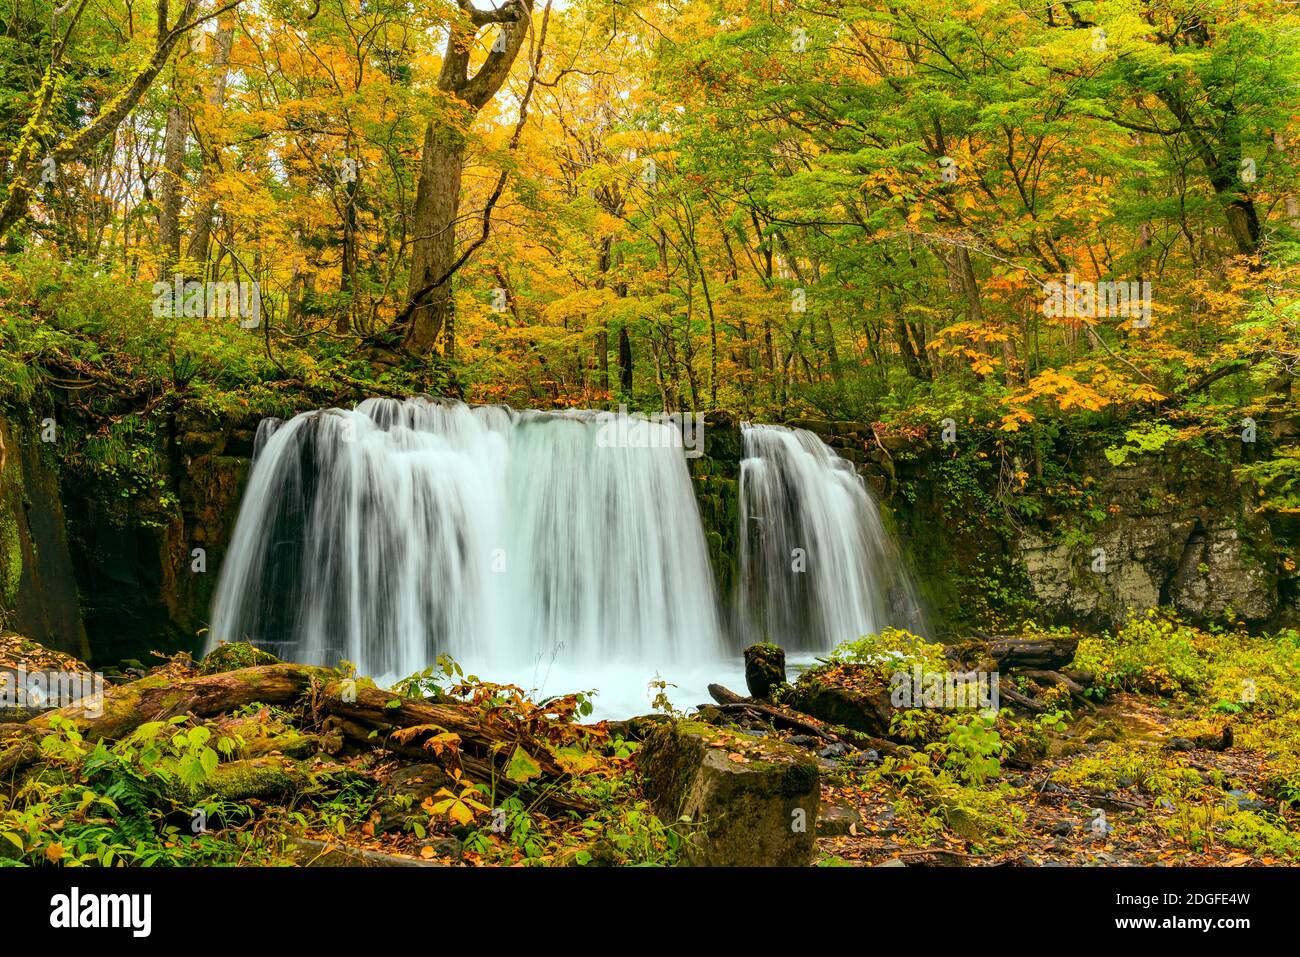 Choshi Otaki Waterfalls in the colorful foliage of autumn forest Stock Photo